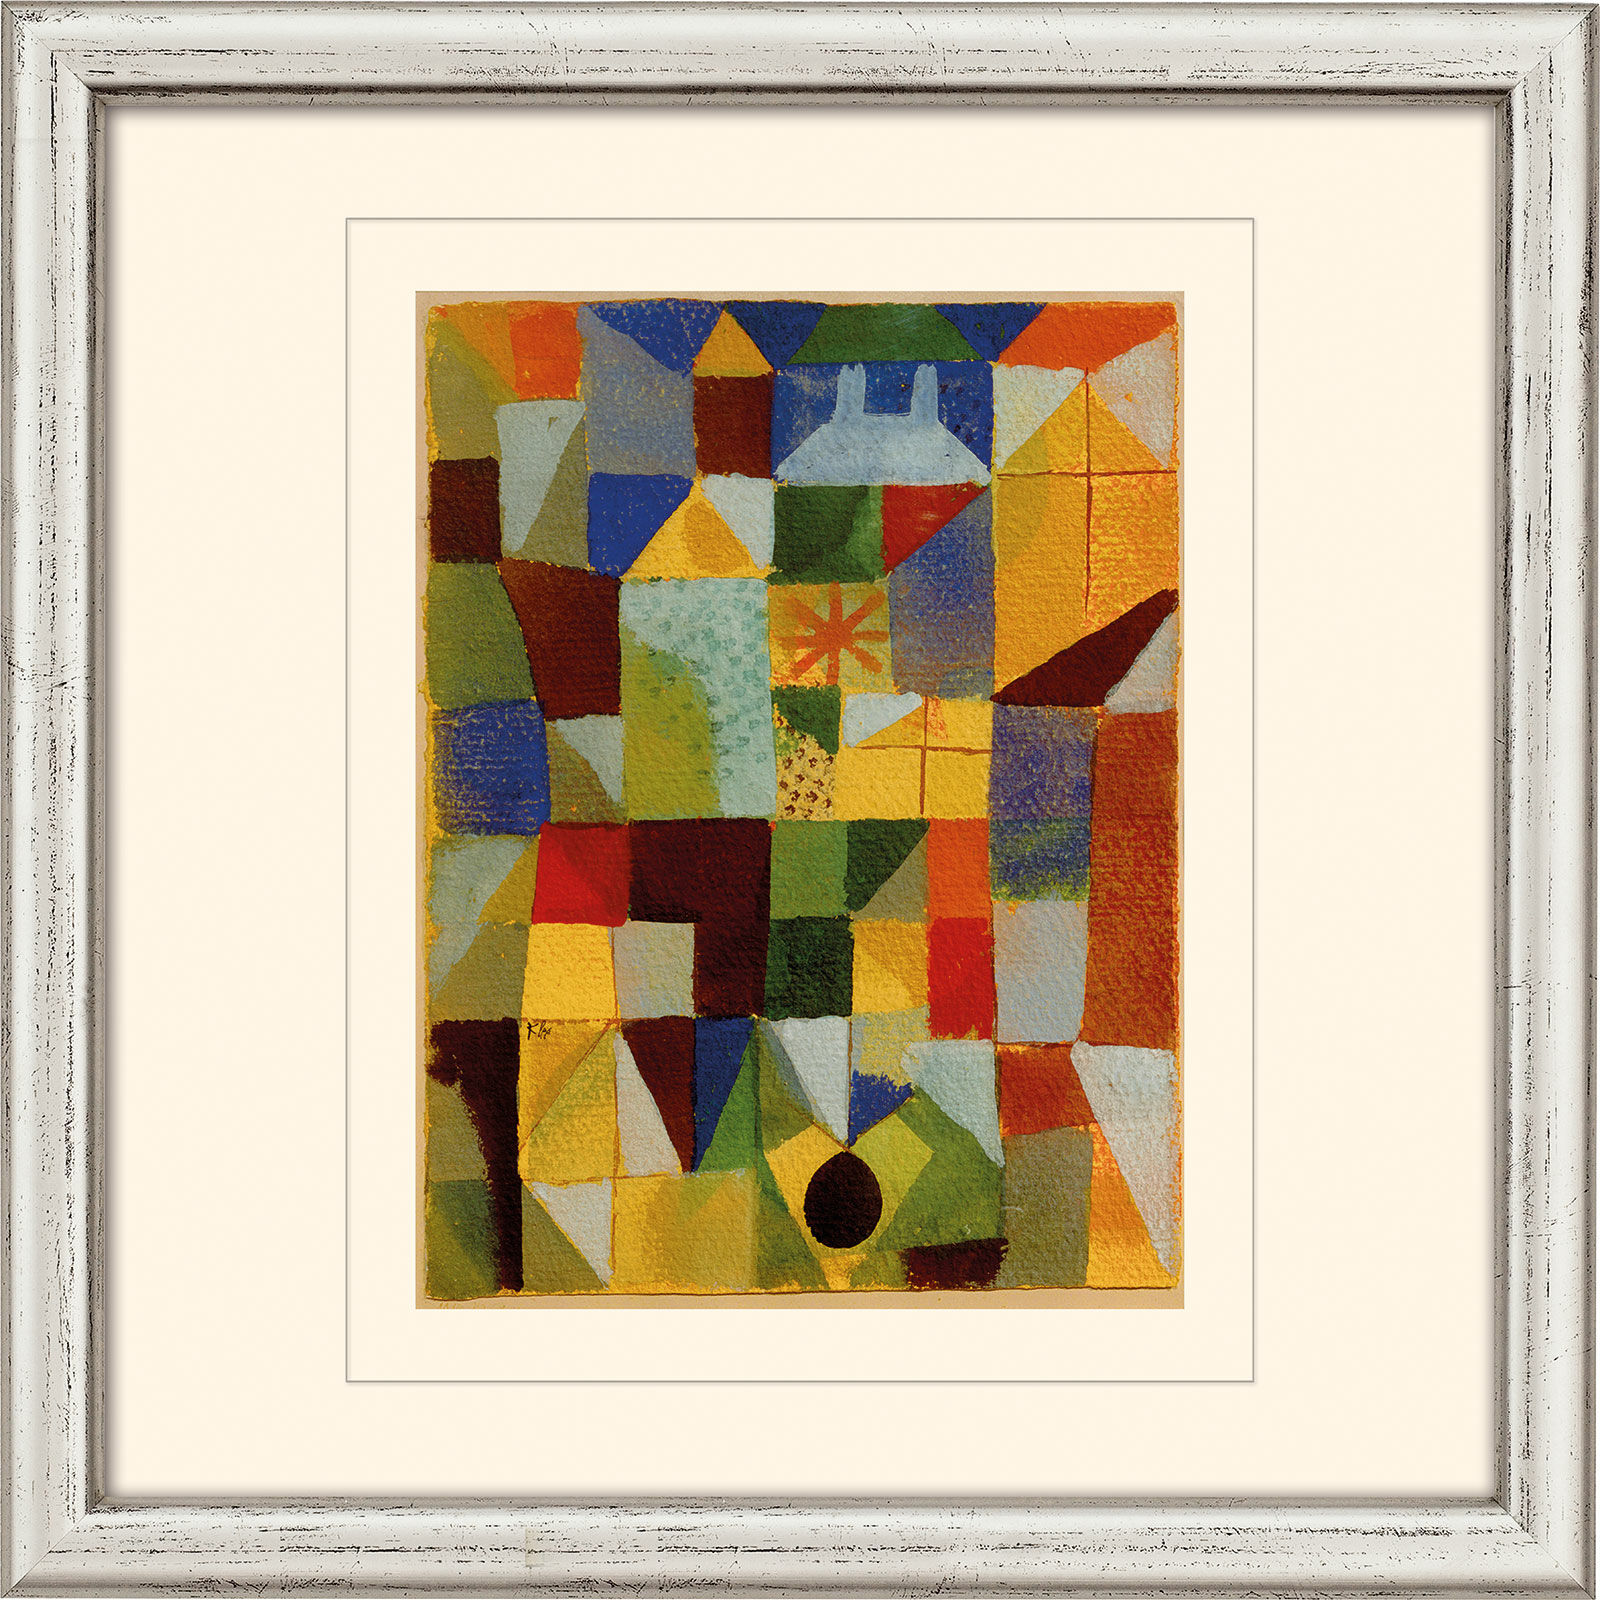 Picture " Urban Composition w. Yellow Windows" (1919), framed by Paul Klee